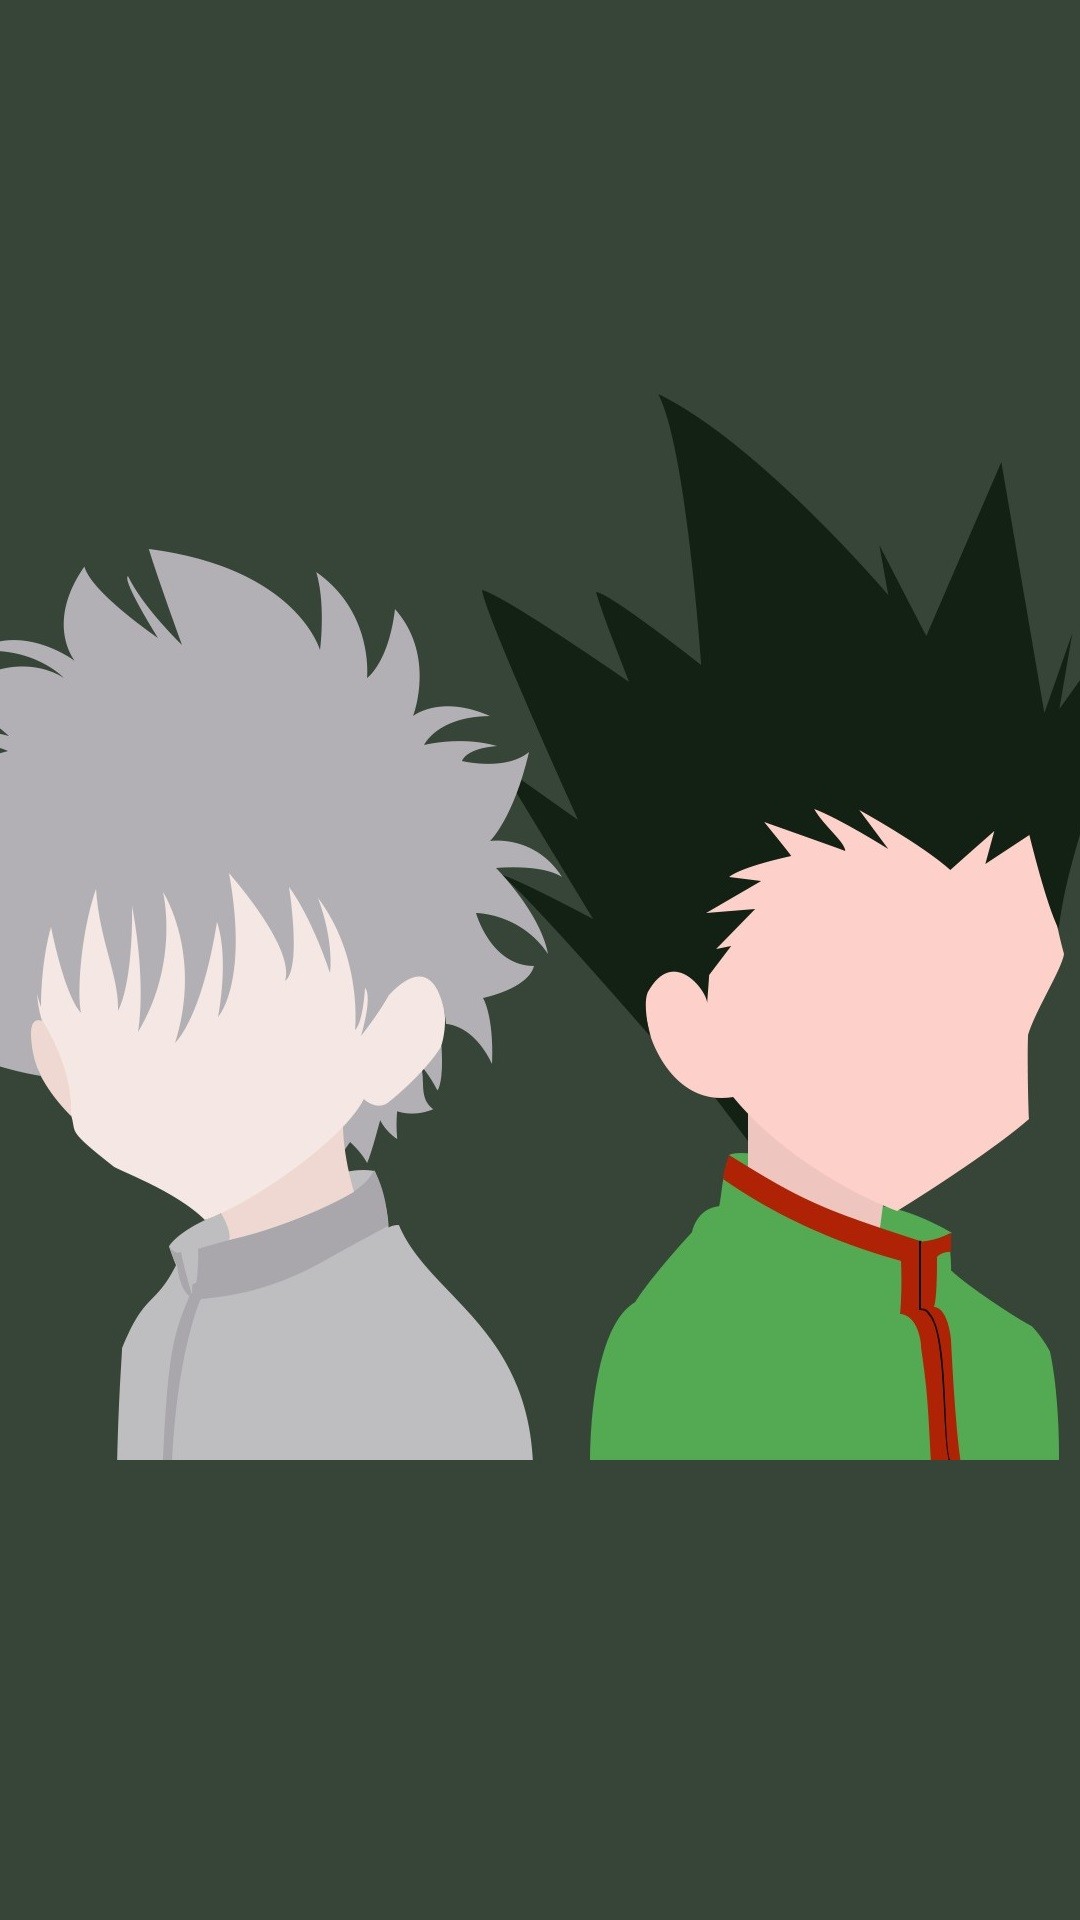 Wallpaper Android Gon And Killua With high-resolution 1080X1920 pixel. You can use this wallpaper for your Android backgrounds, Tablet, Samsung Screensavers, Mobile Phone Lock Screen and another Smartphones device